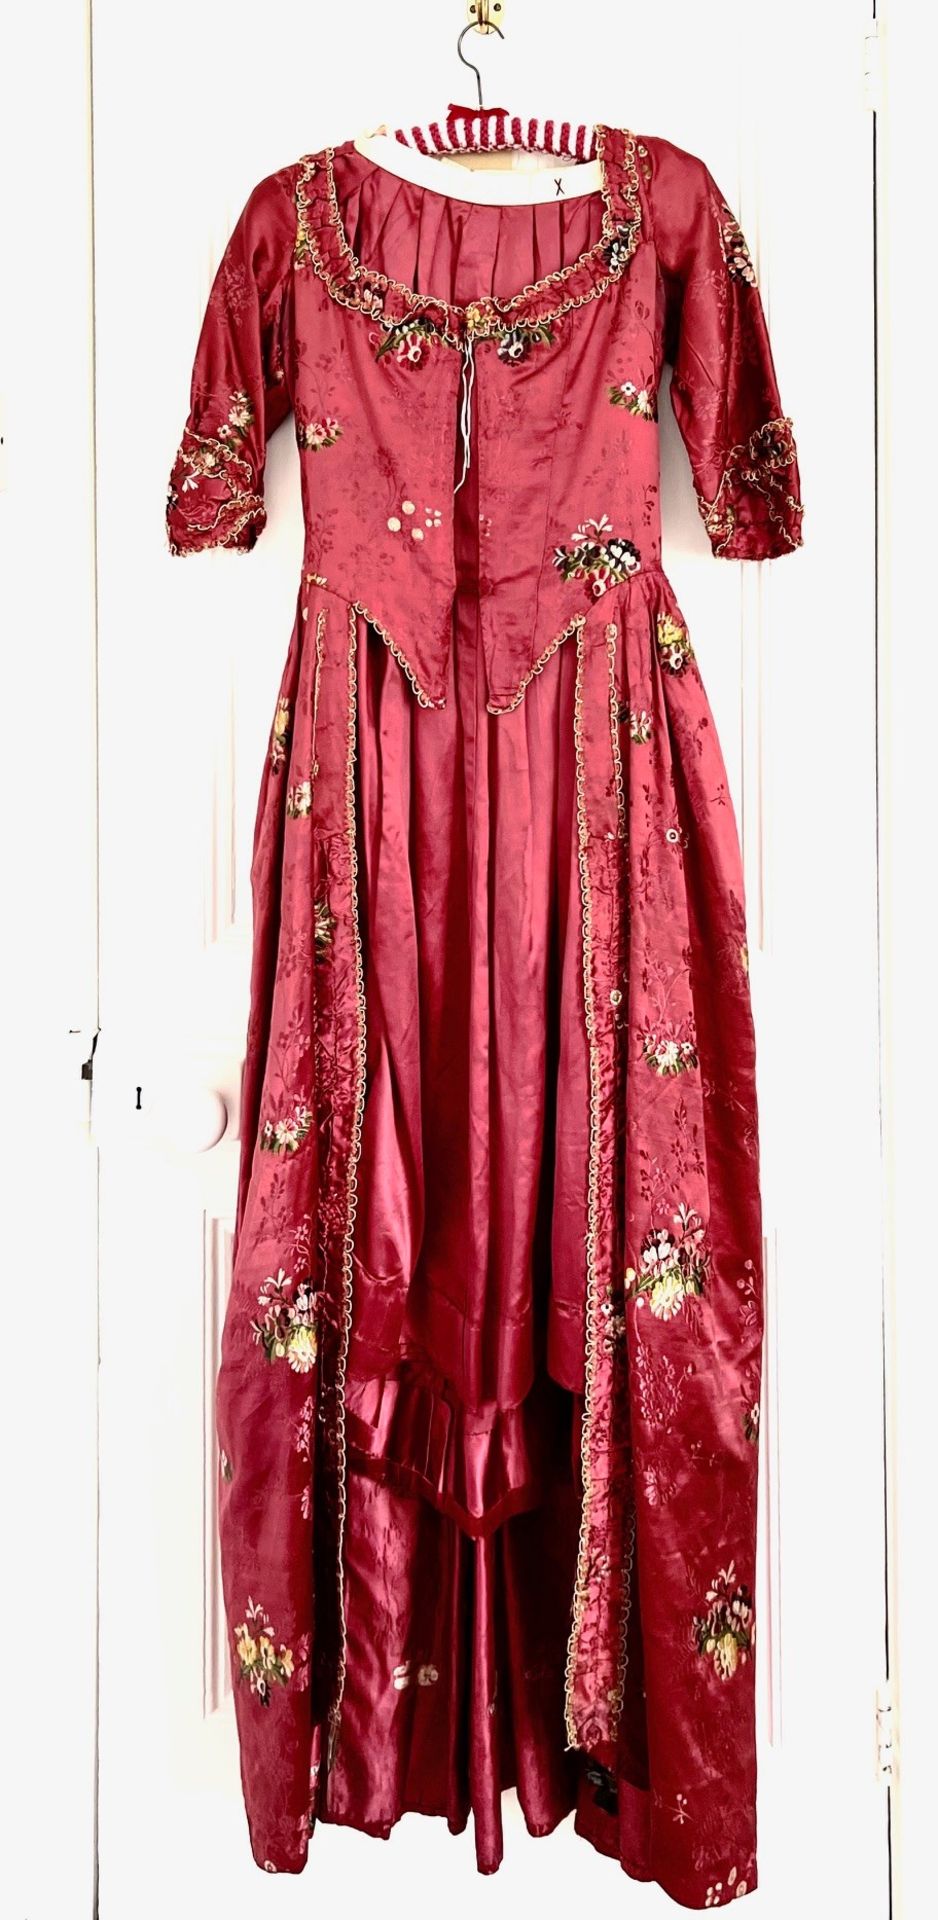 EMBROIDERED SILK DRESS, APPROX DATE 1786, WAIST APPROX 66cm, LENGTH TO HEM APPROX 136cm - Image 2 of 5